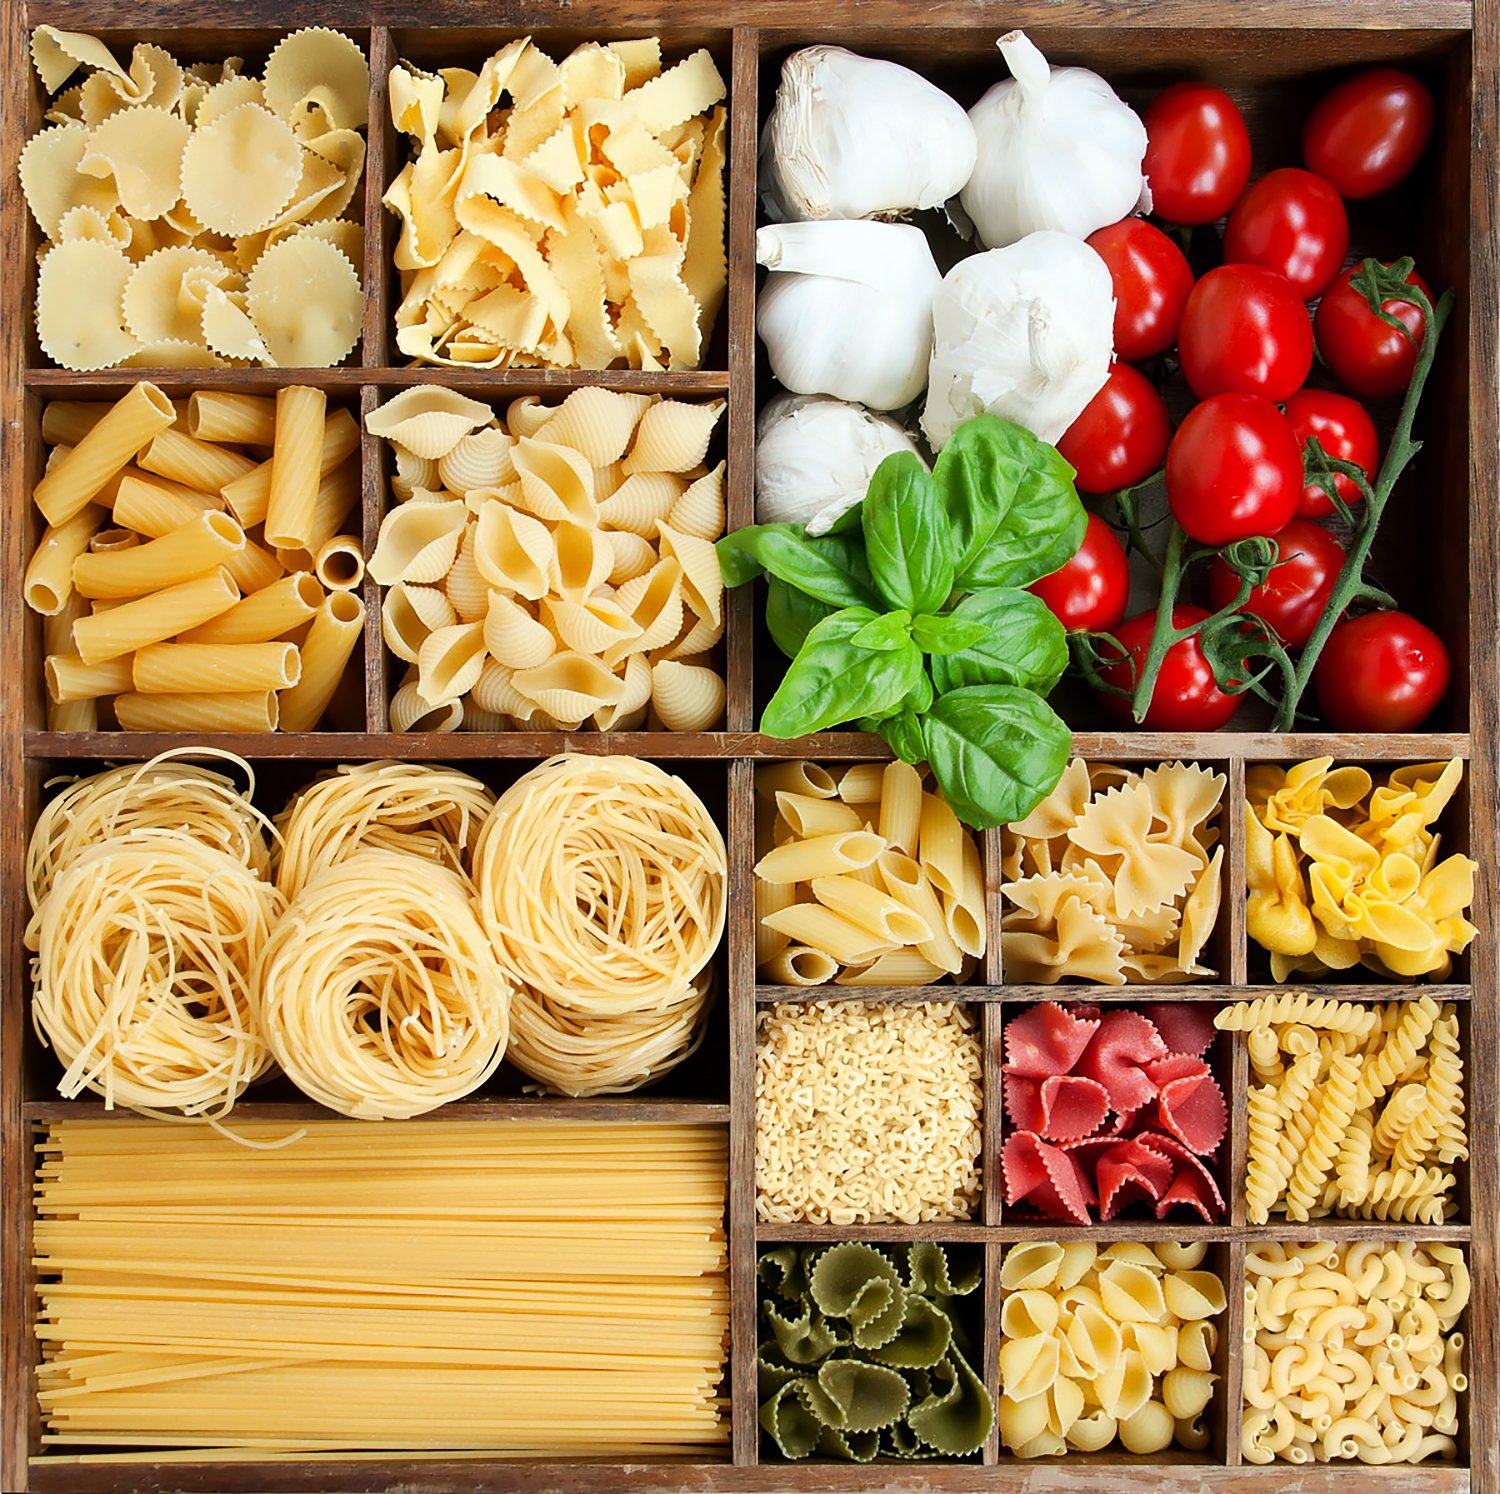 various types of pastas that you would find in an Italian pantry when learning how to stock a pantry for the first time.